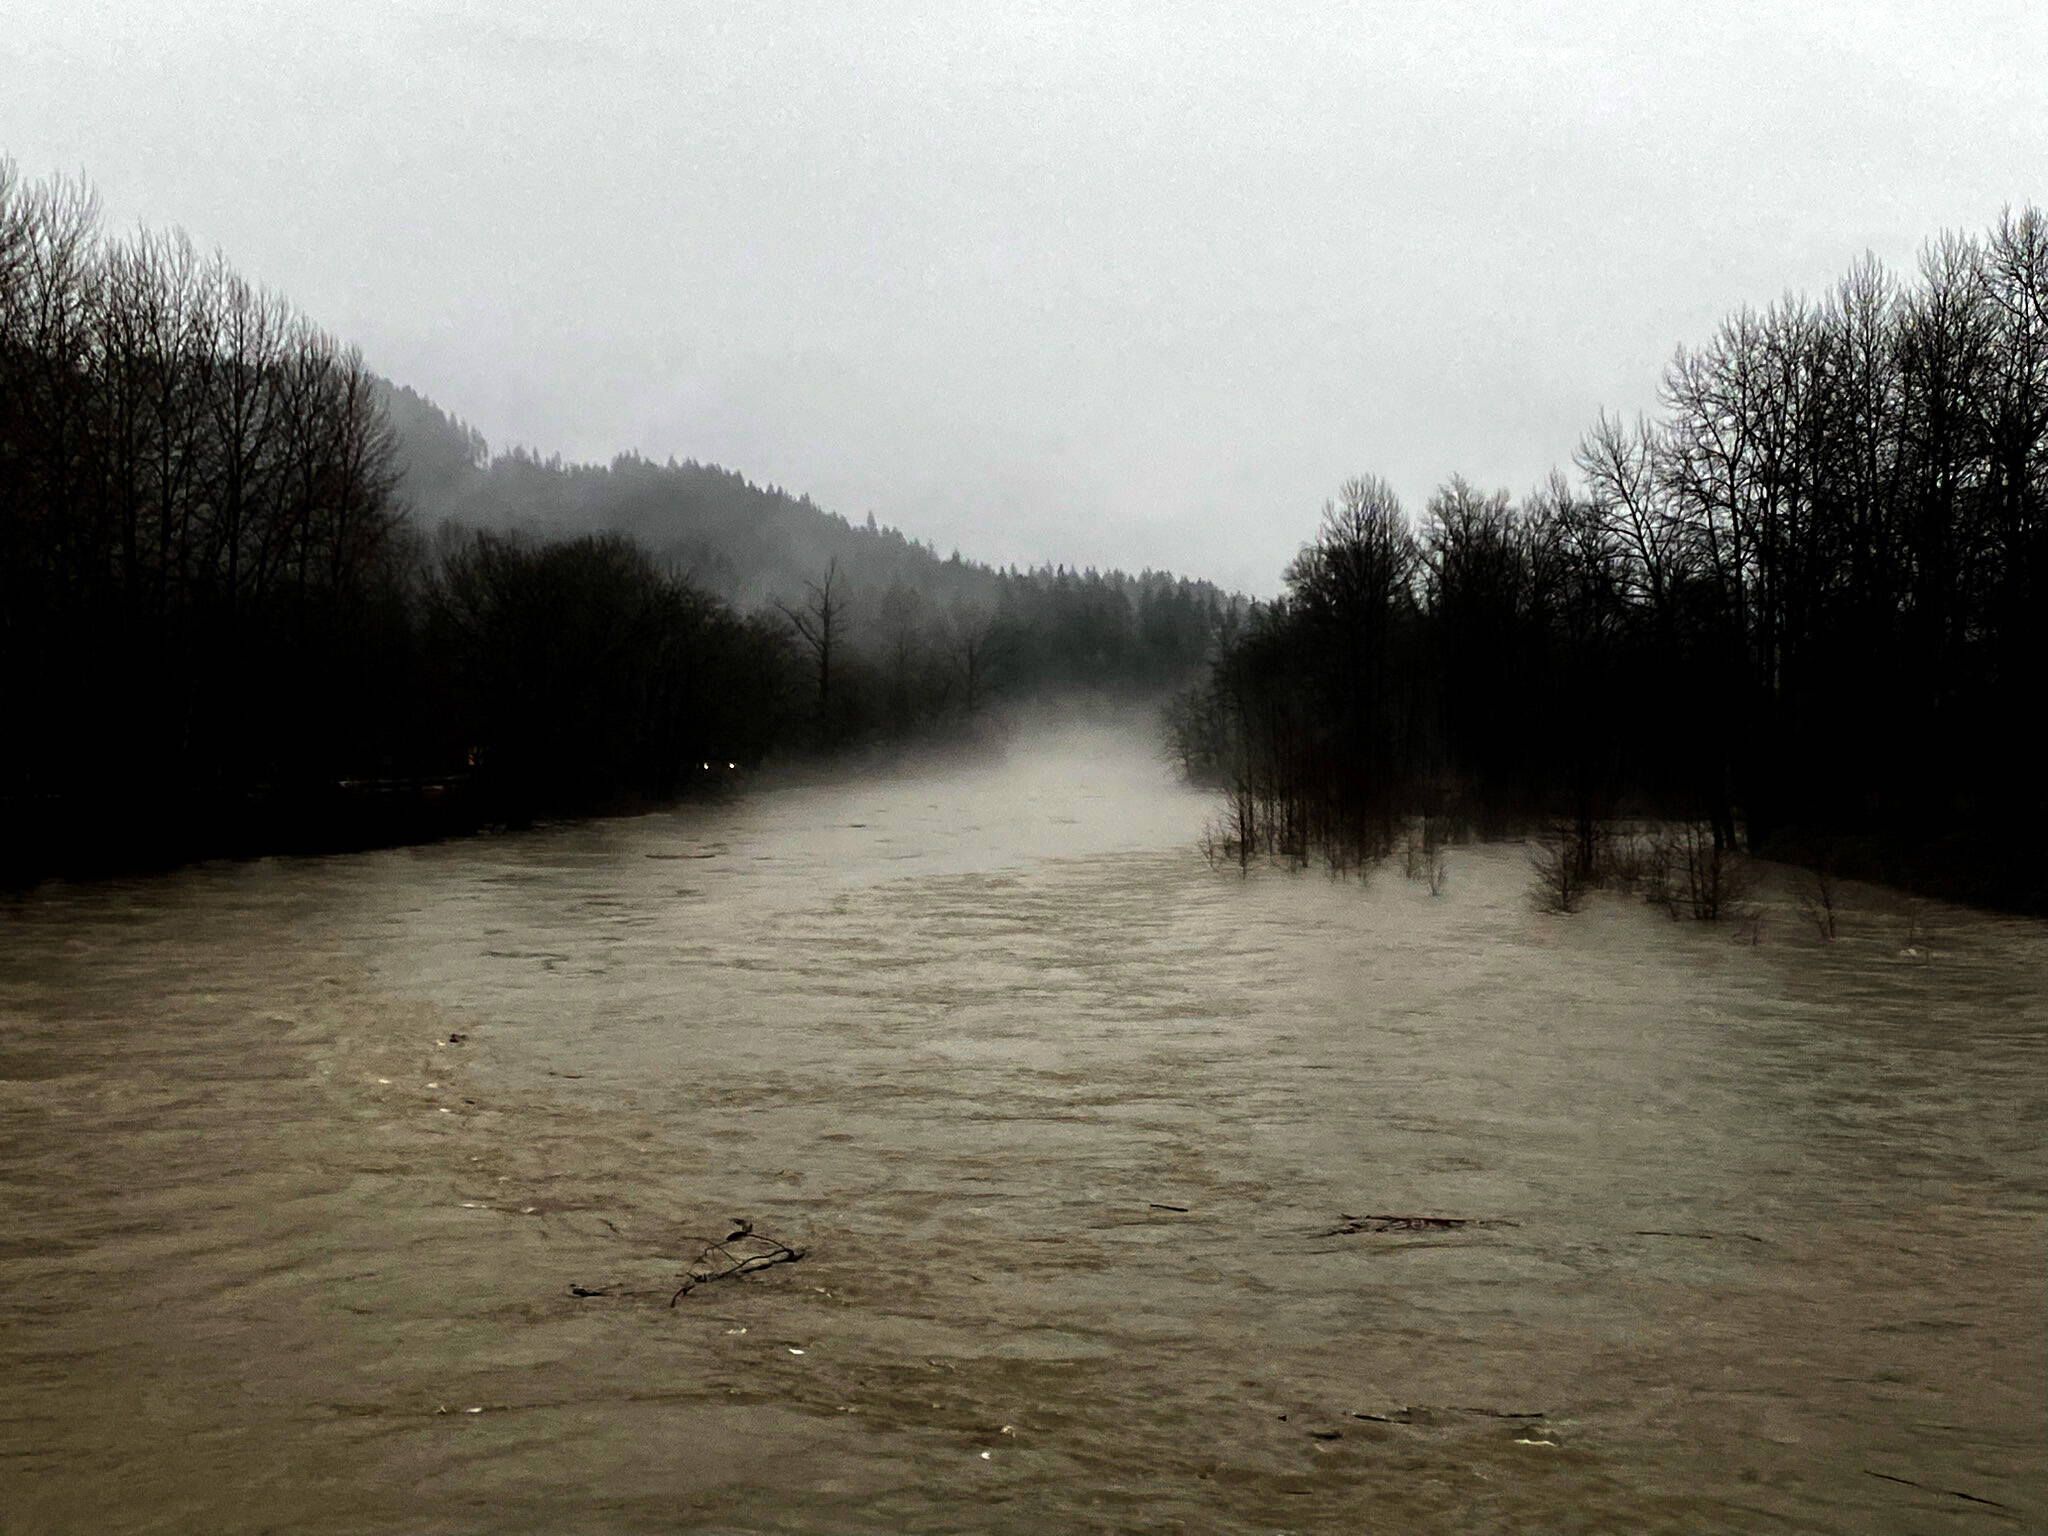 The Snoqualmie River viewed from the State Route 202 bridge in Fall City on Dec. 5. Photos William Shaw/ Valley Record.